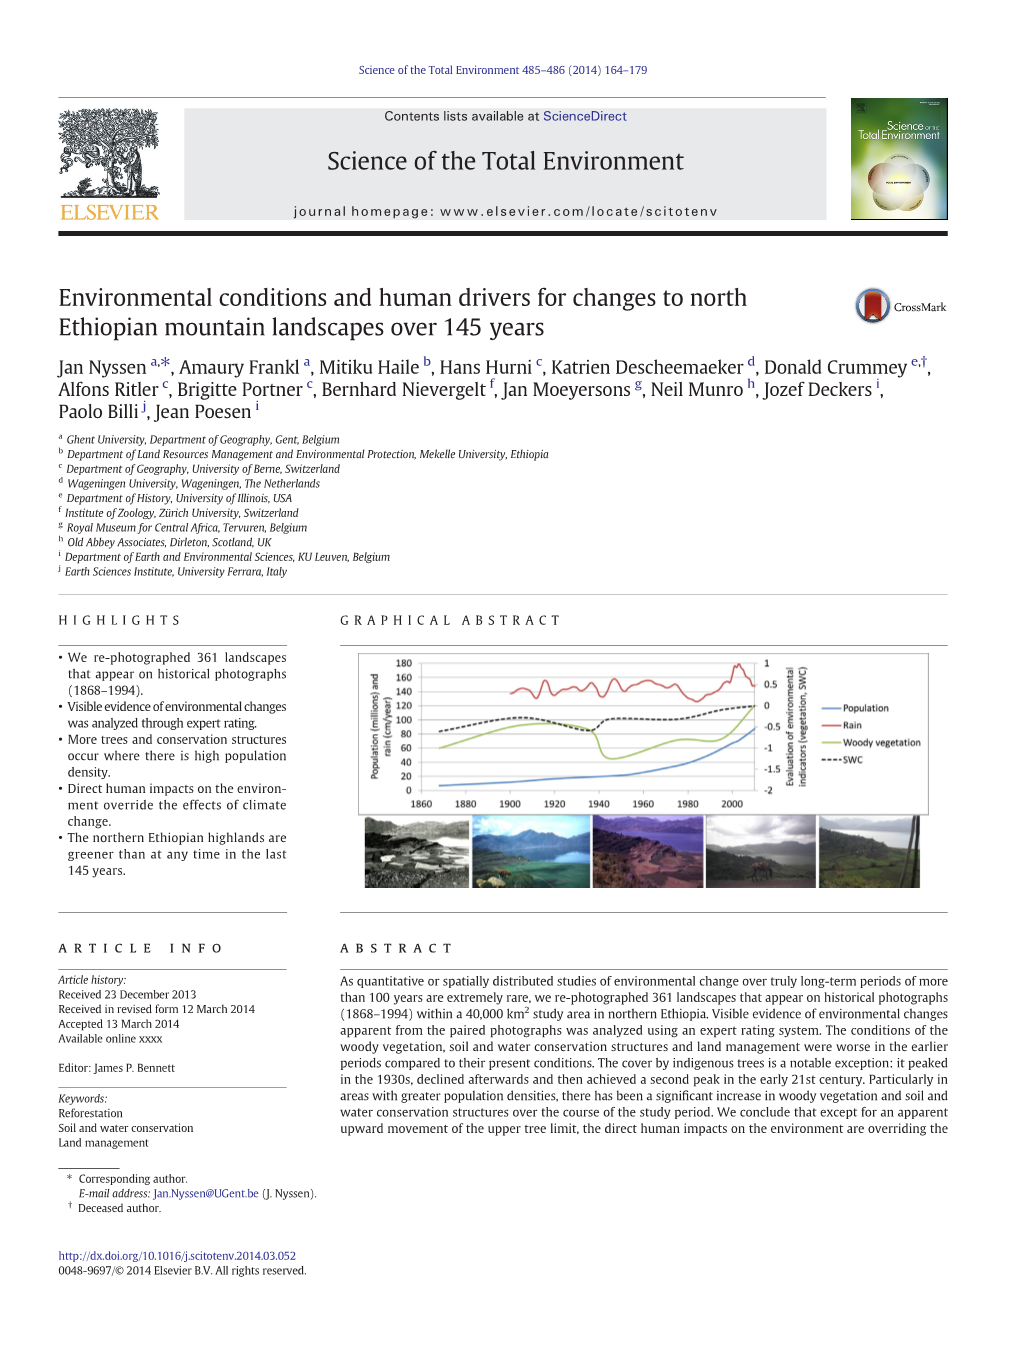 Environmental Conditions and Human Drivers for Changes to North Ethiopian Mountain Landscapes Over 145 Years